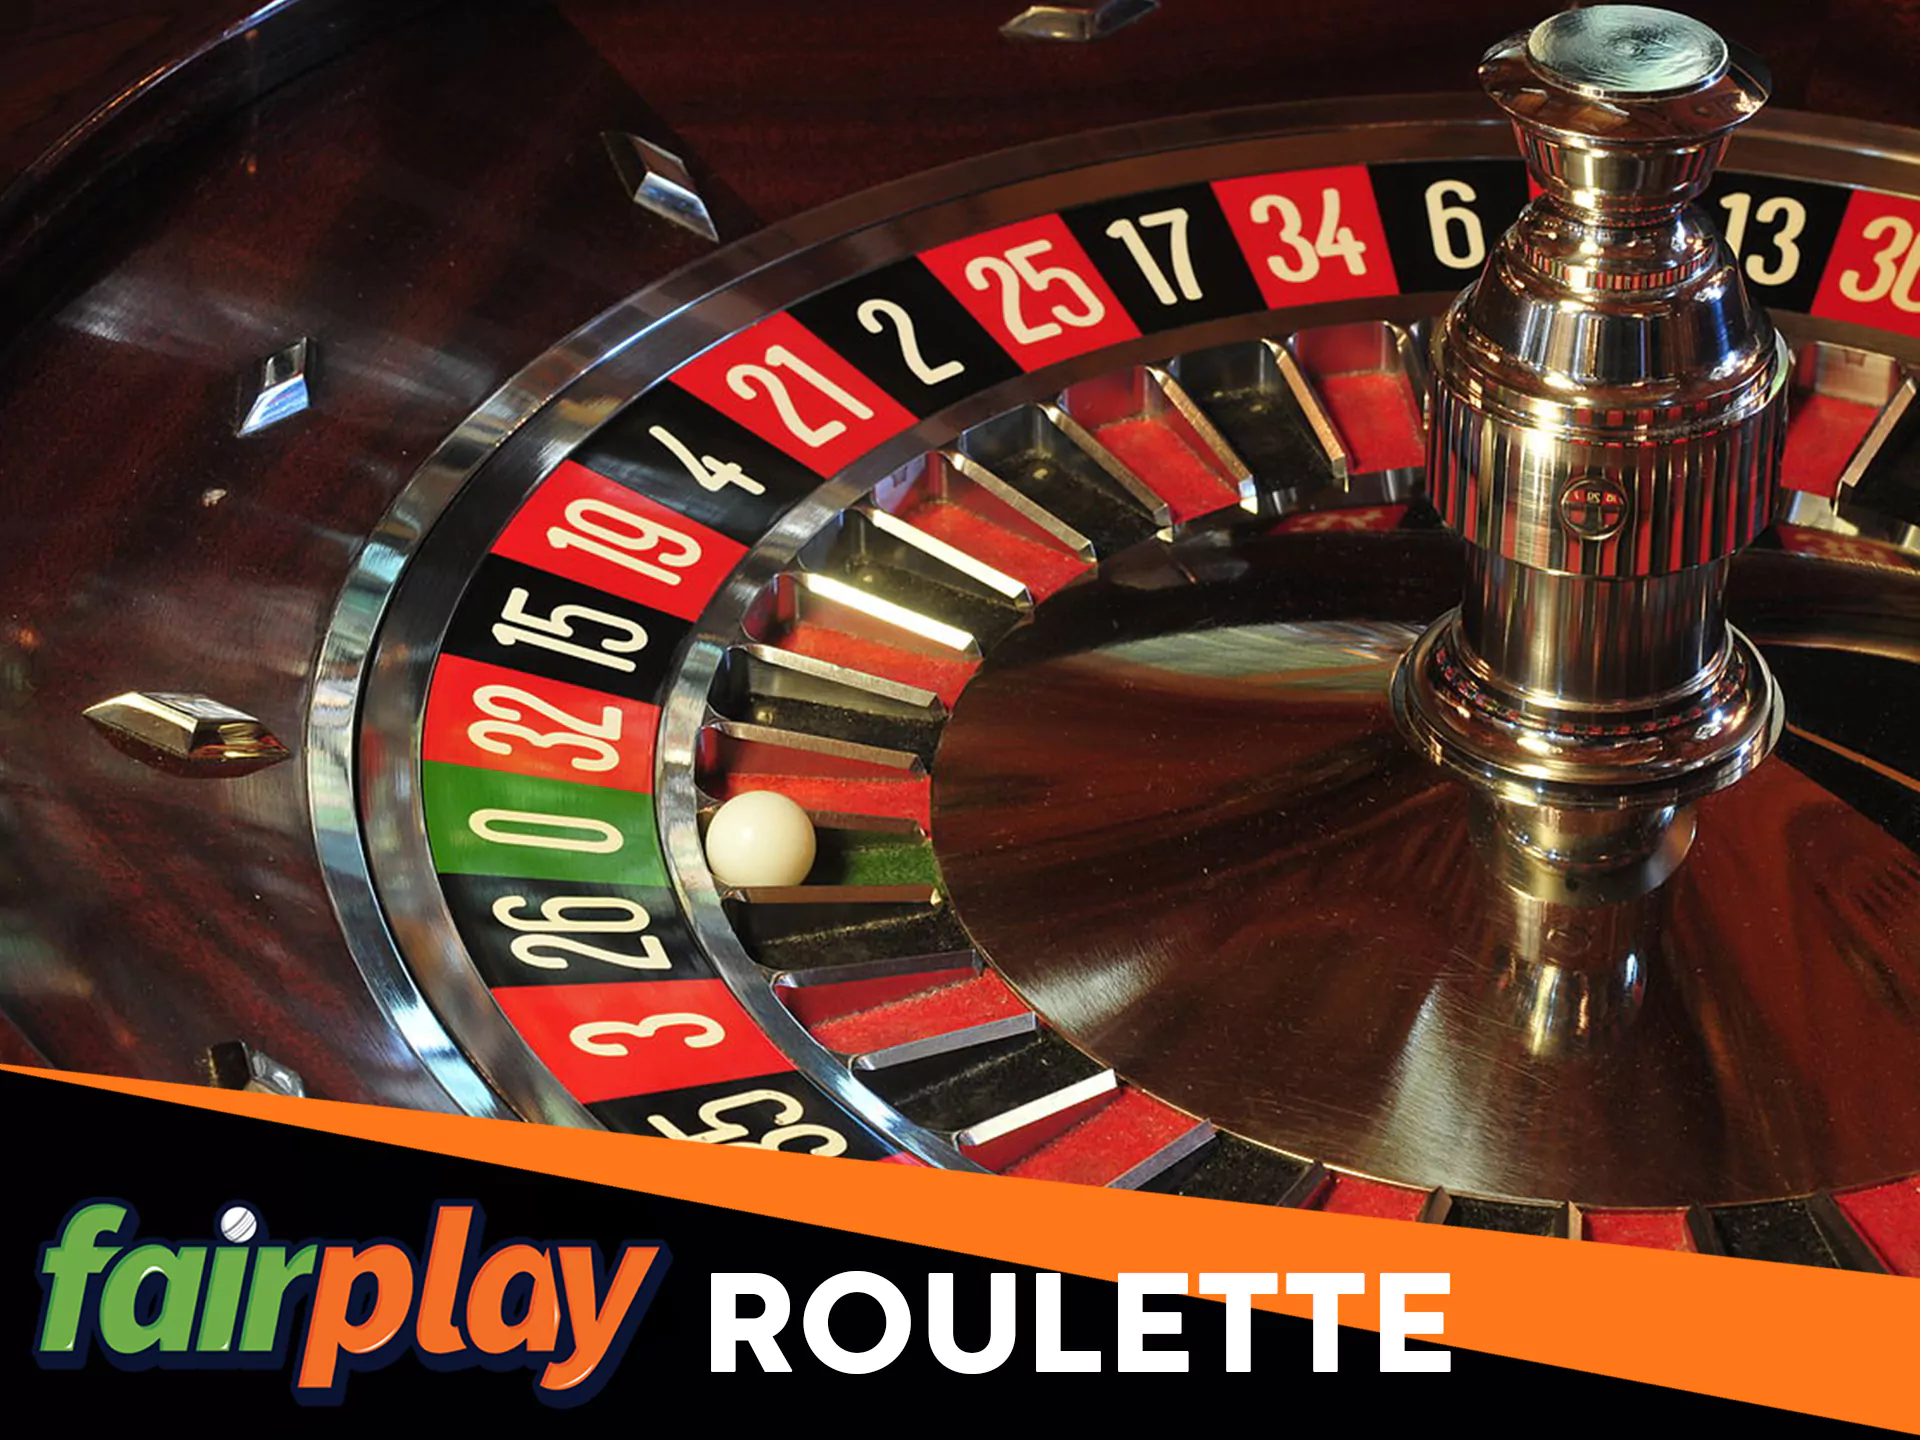 Play roulette at Fairplay.